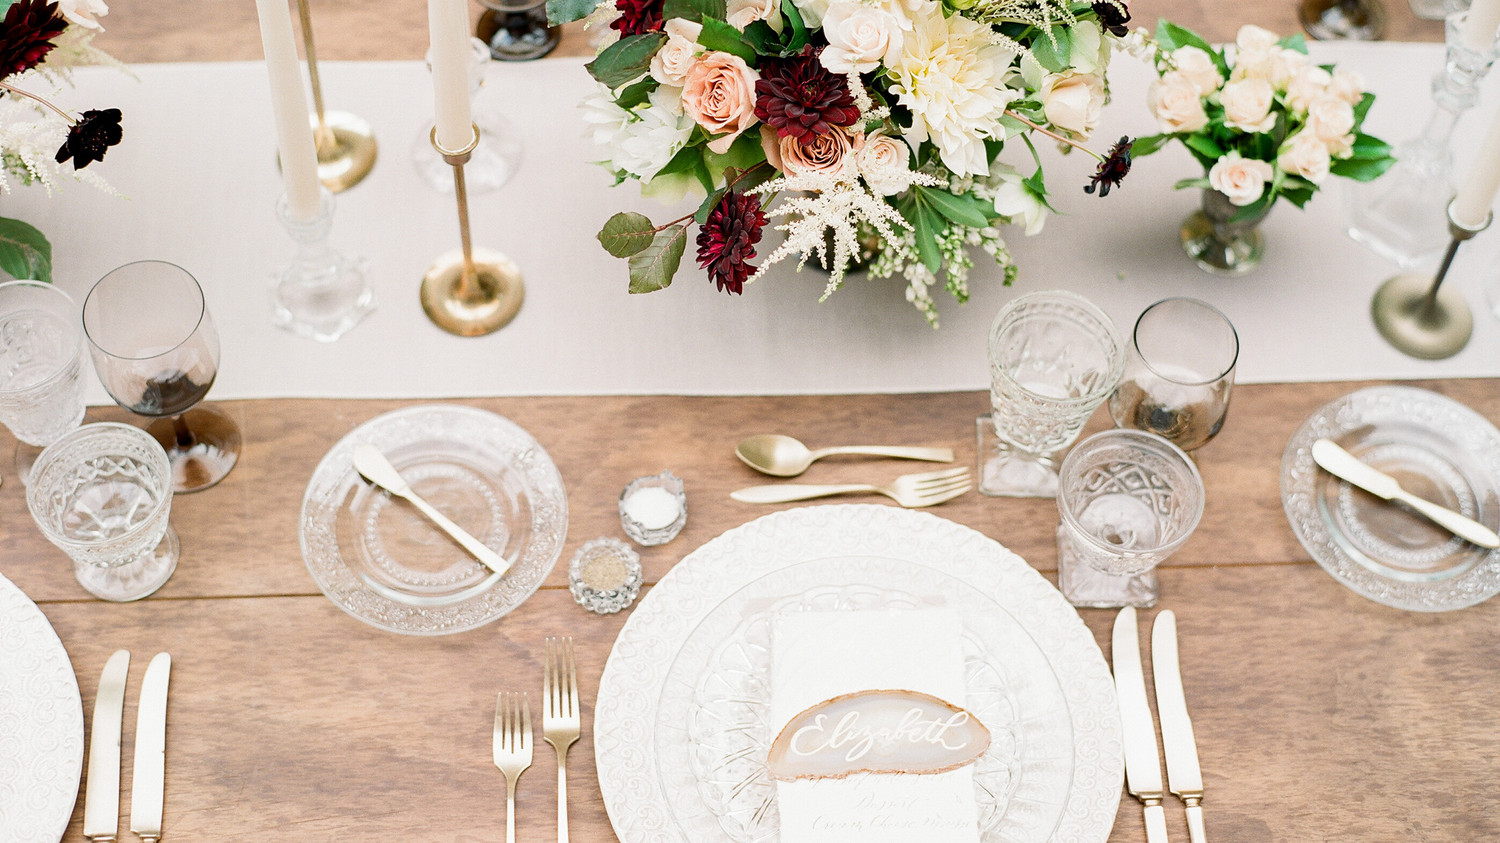 This Dreamy Wedding Tablescape Gives New Meaning to 